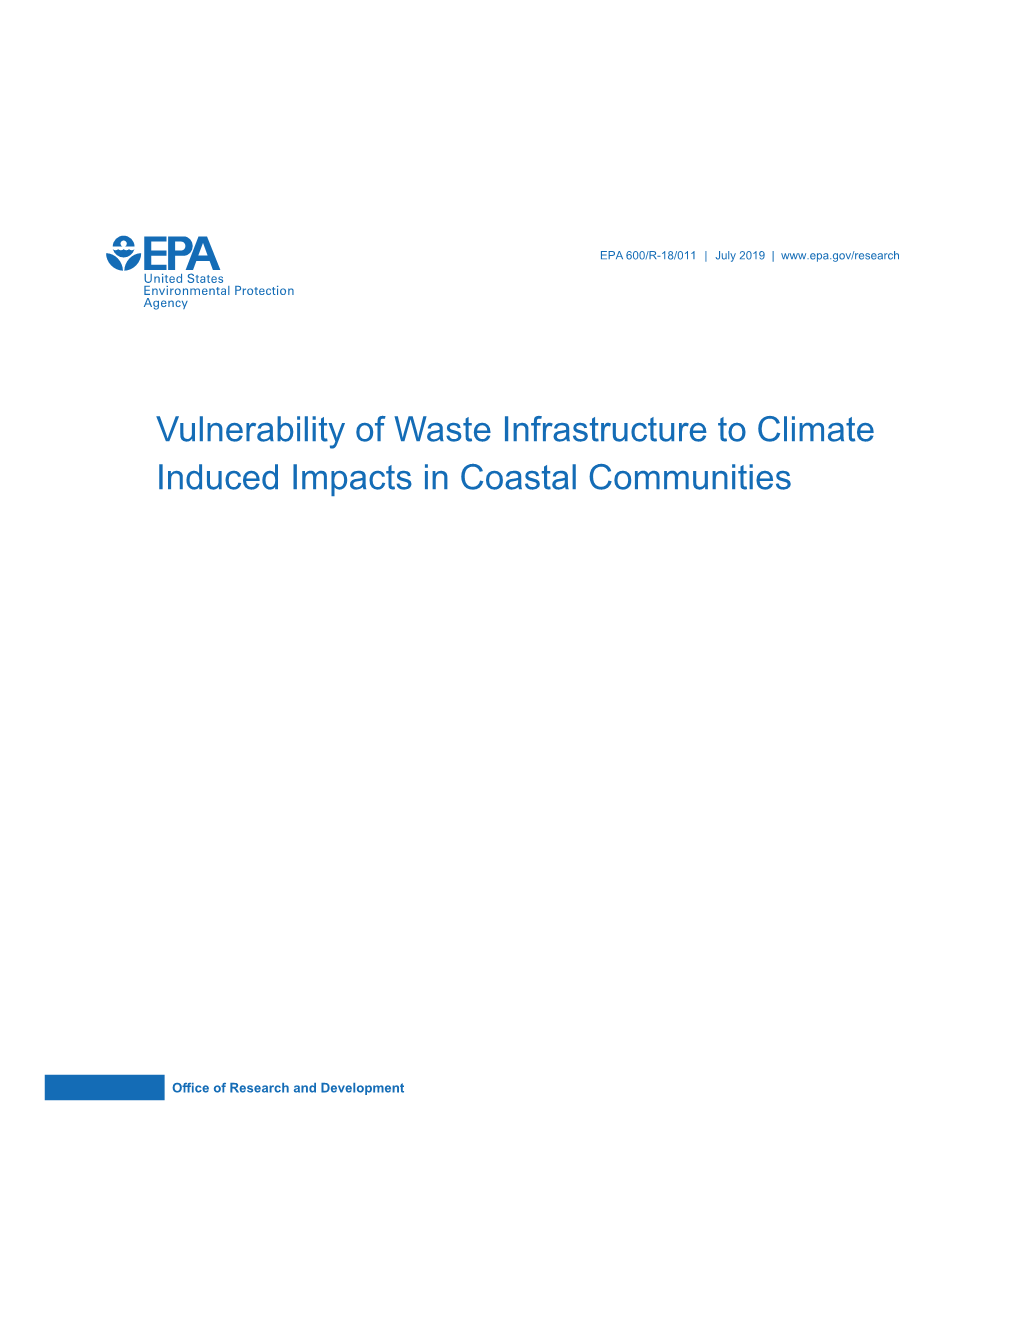 Vulnerability of Waste Infrastructure to Climate-Induced Impacts in Coastal